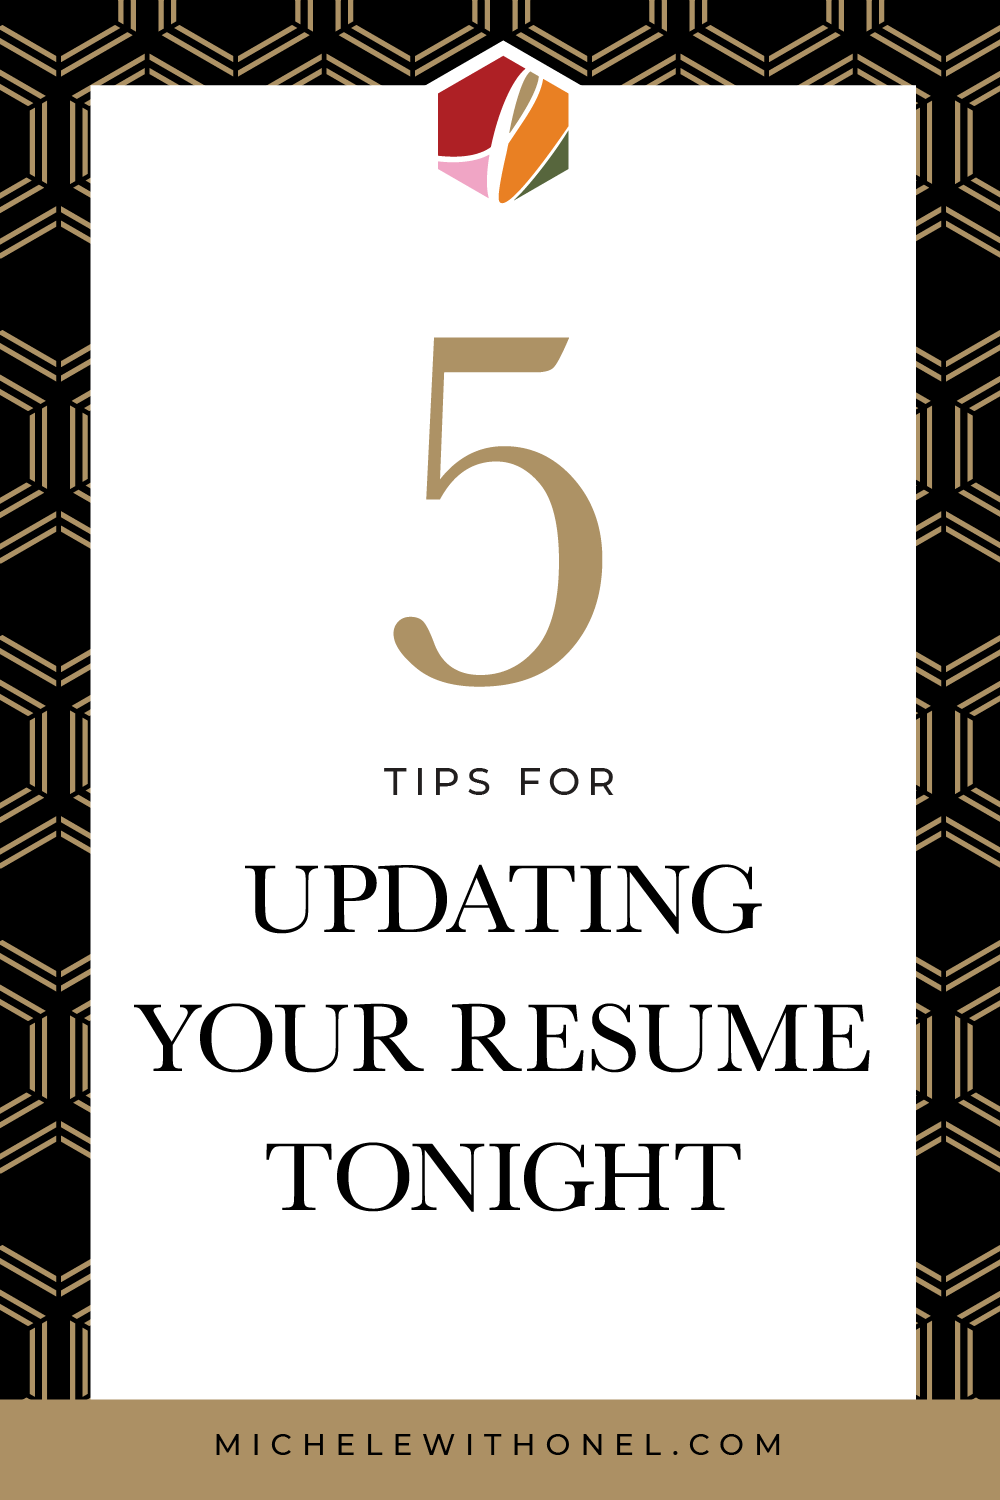 Has it been years since you updated your resume? This post is for you! Head over to the blog now to discover 5 tips to help you get started updating your resume right now — plus answers to questions like, How long should my resume be, and do I need to add color and special formatting? #resume #admin #resumewriting #business